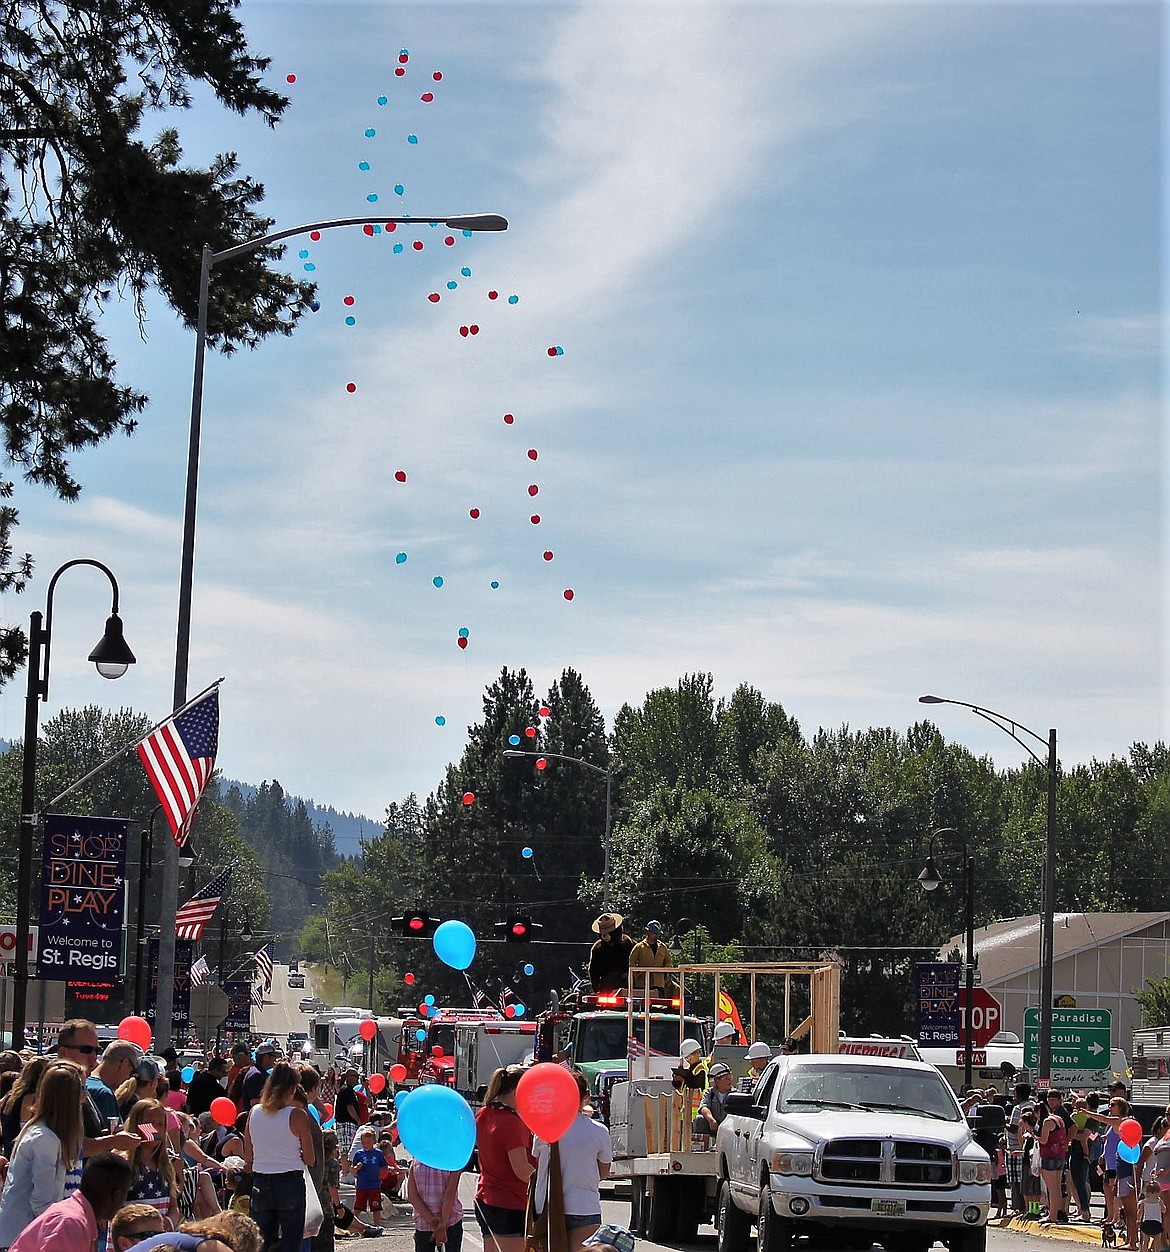 A string full of red and blue balloons fly high into the summer sky at the end of the parade.